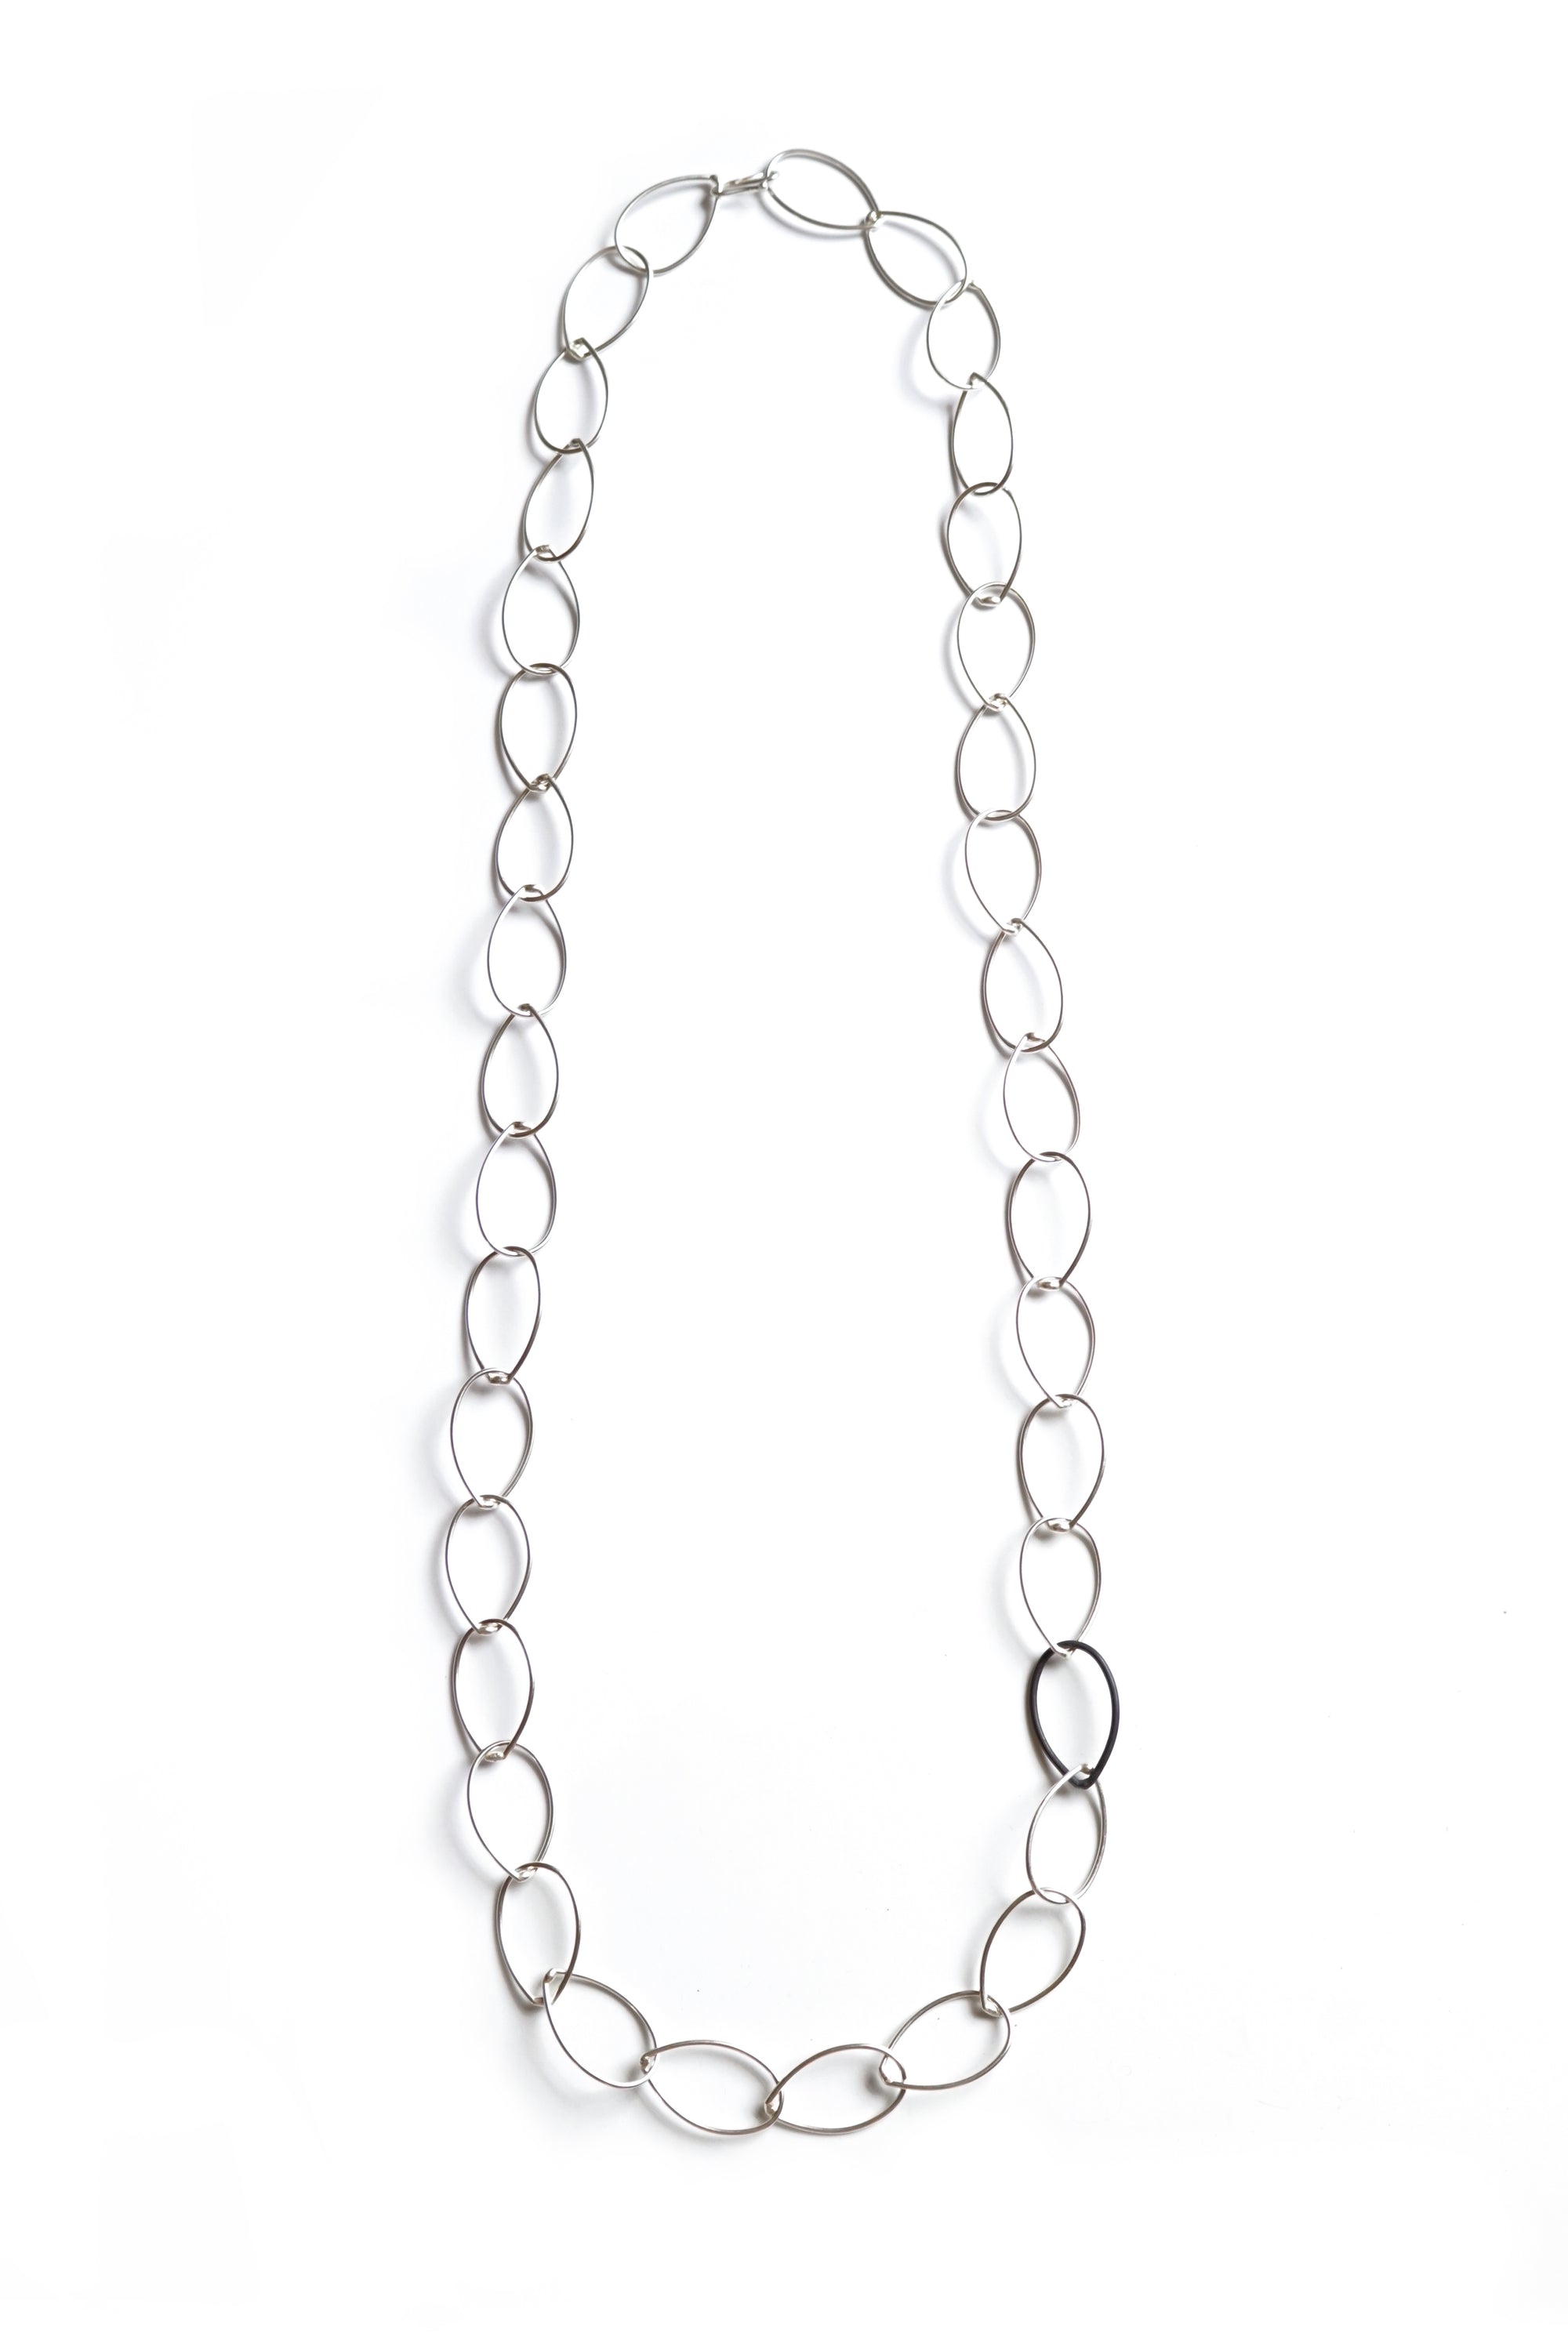 Alice necklace - silver with steel accent